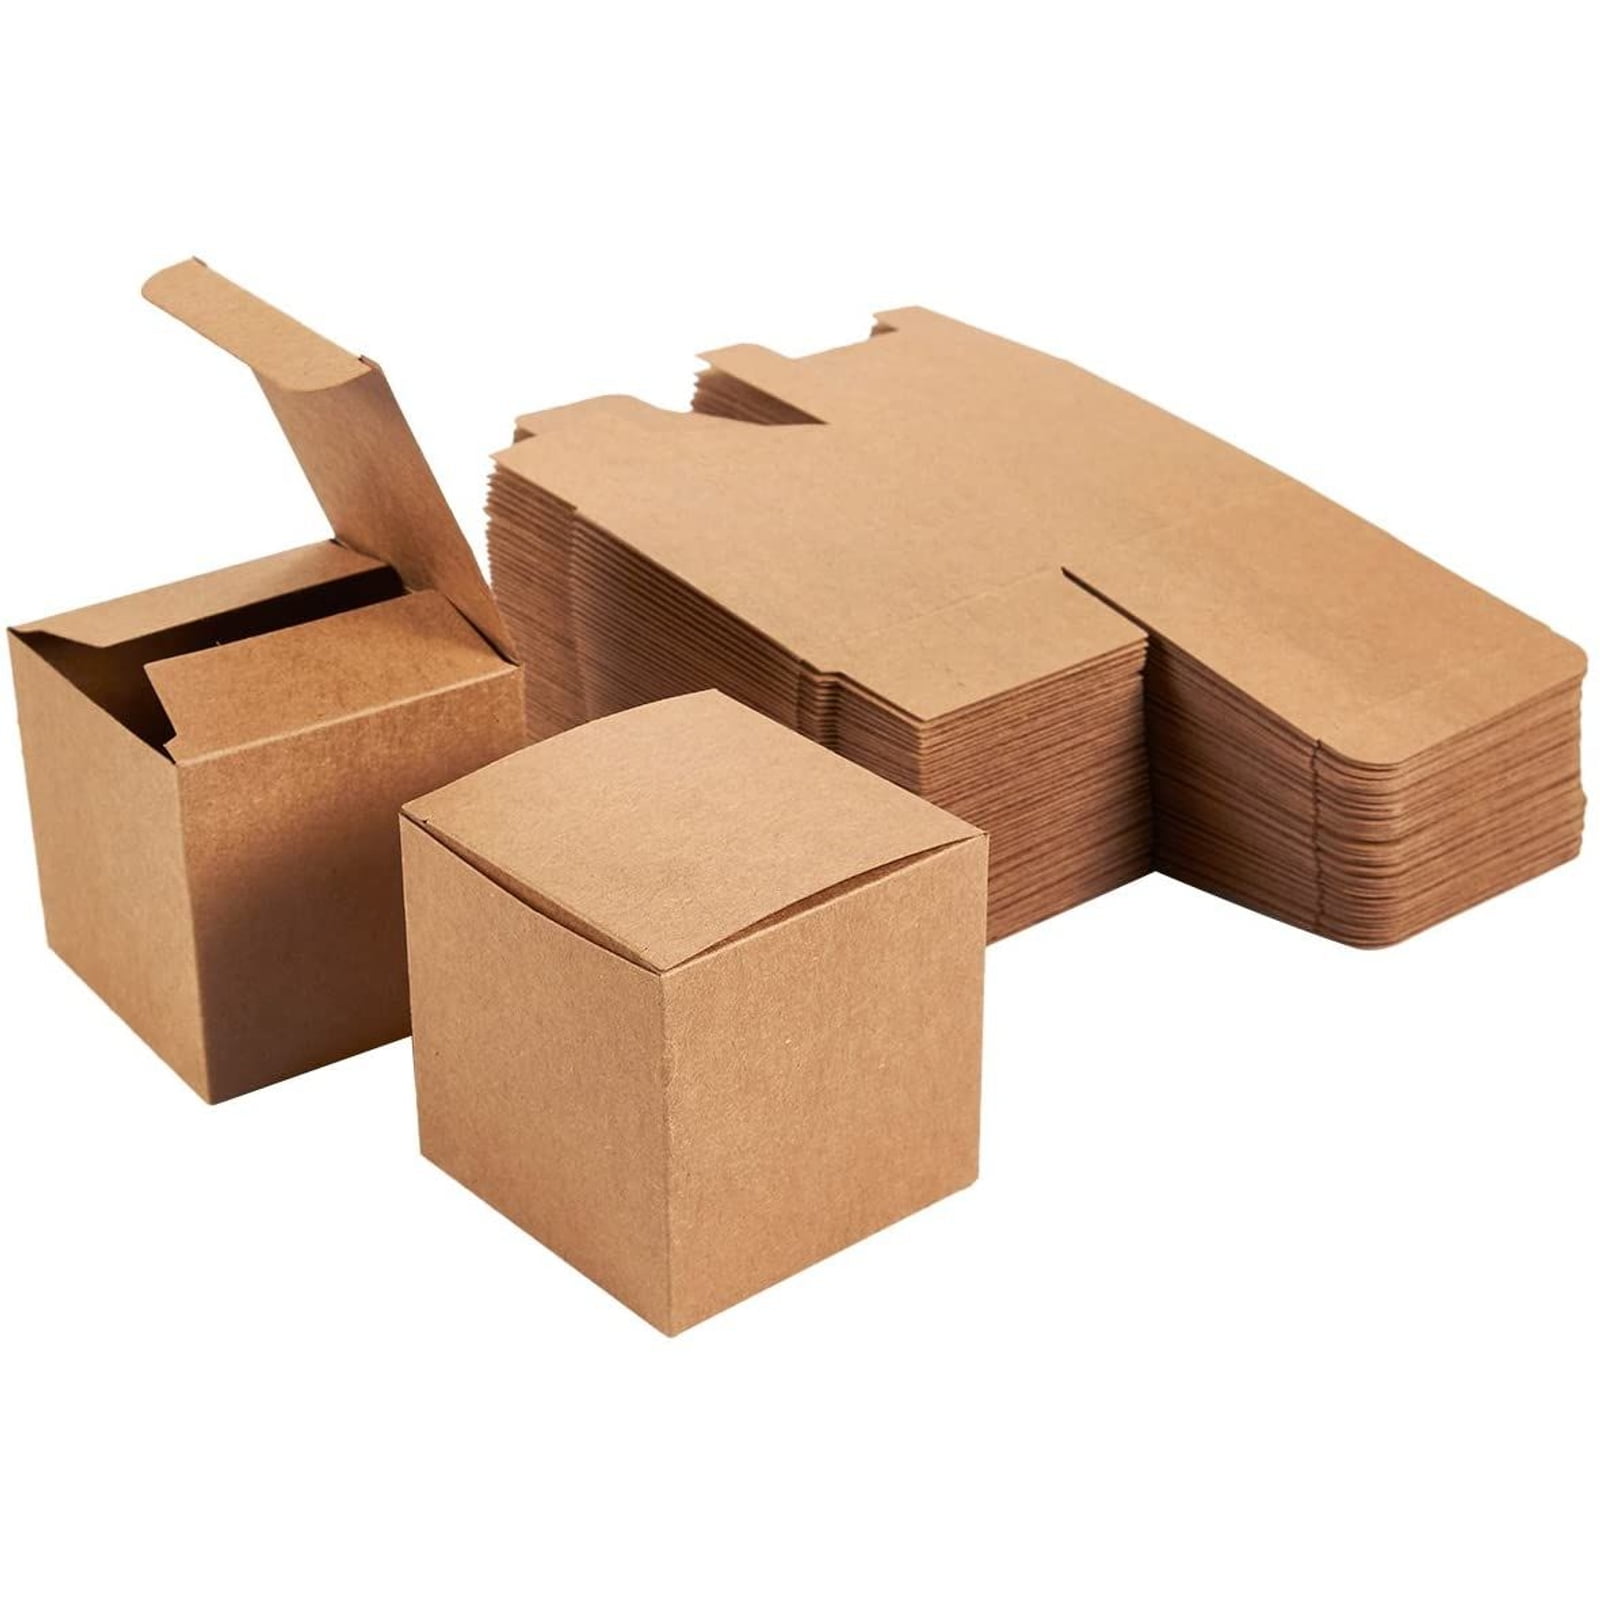 Nati Brown Kraft Gift Boxes 50 Pack - Brown Kraft Paper Favour Gift Box Weddings S Easy Assemble Presentation Favour Box Present Boxes for Parties Birthdays 55 * 55 * 25mm 